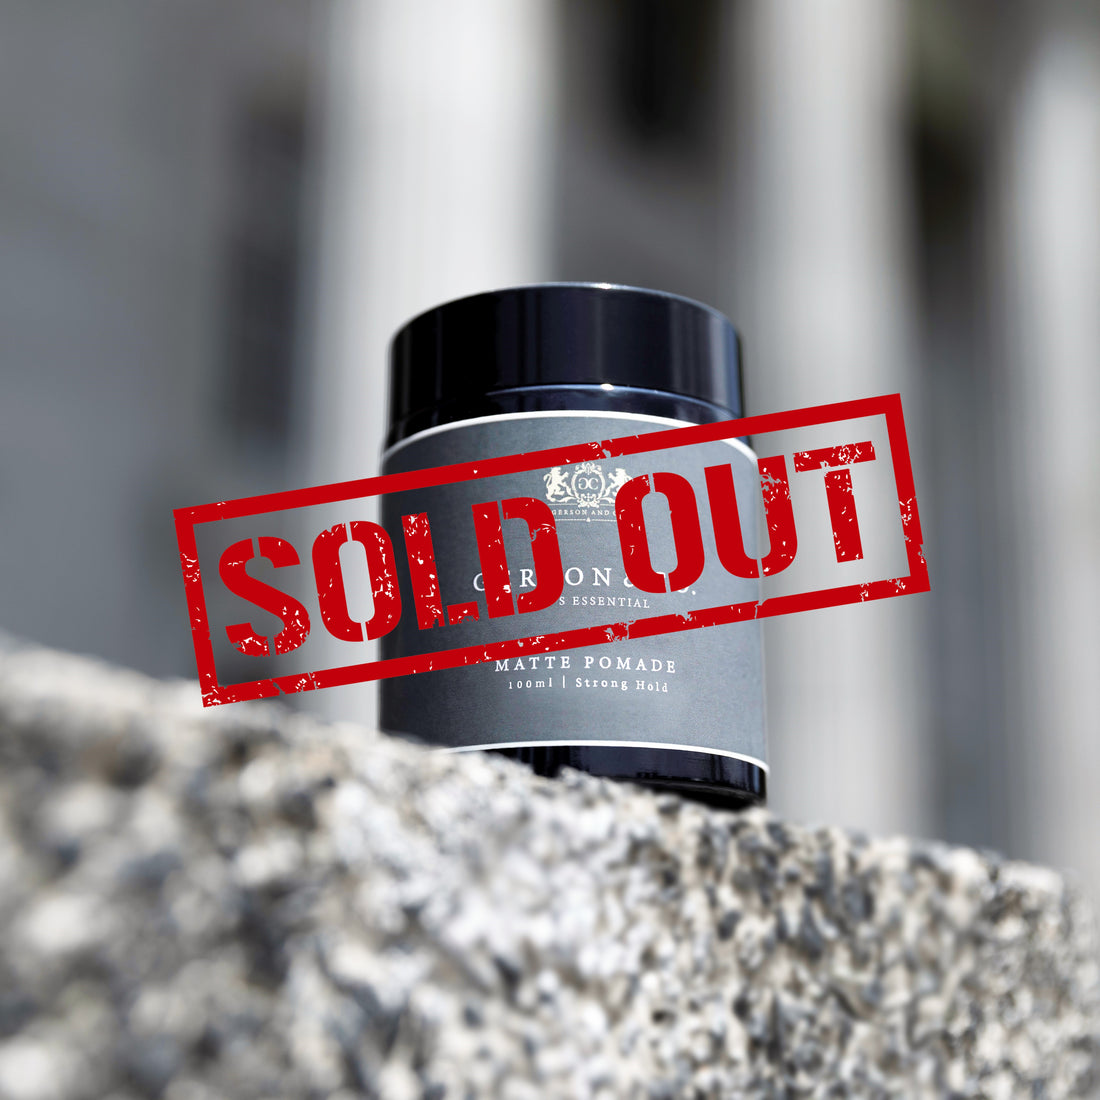 Matte Pomade is now sold out!